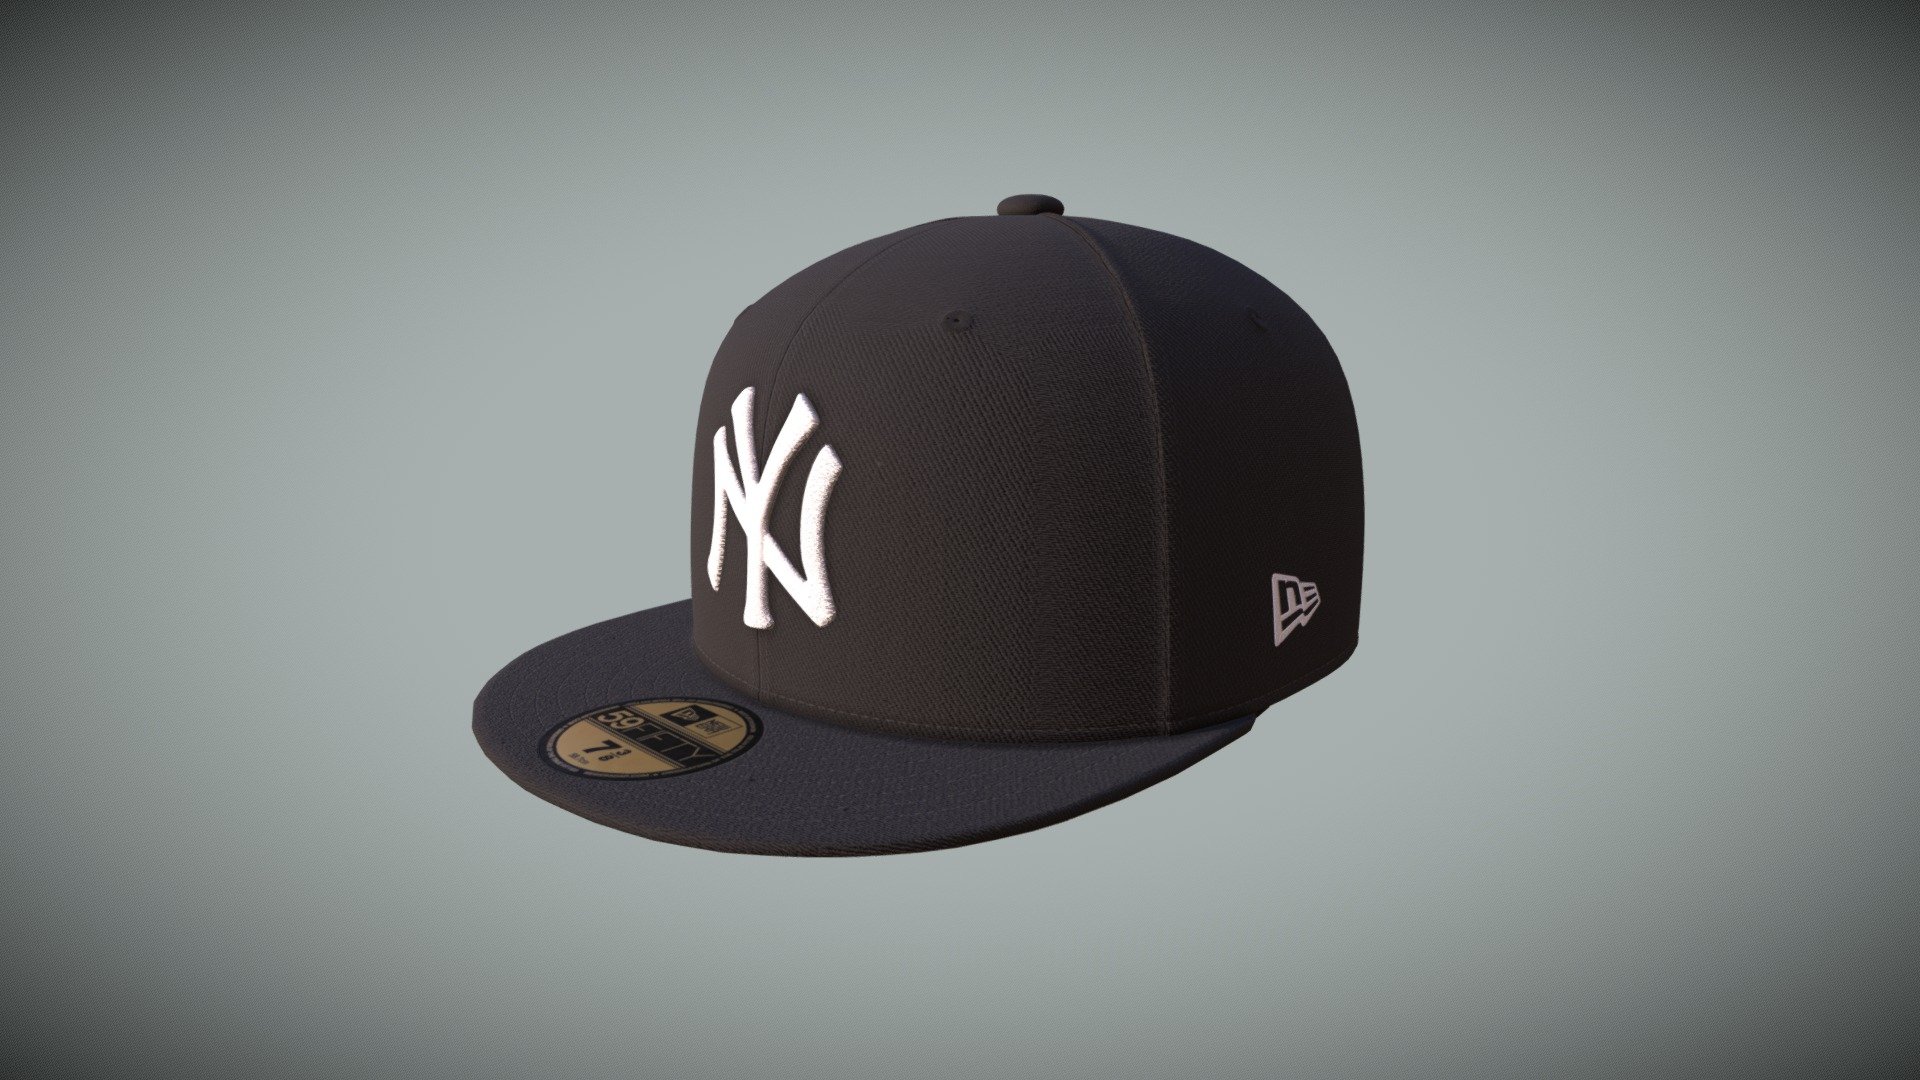 Realistic cap model with an embroidered Yankees logo at the front panels with the MLB logo at the rear and a gray undervisor

4K texture resolution - New York Yankees 59FIFTY Fitted Cap - 3D model by Can Mustafa (@c42m05) 3d model